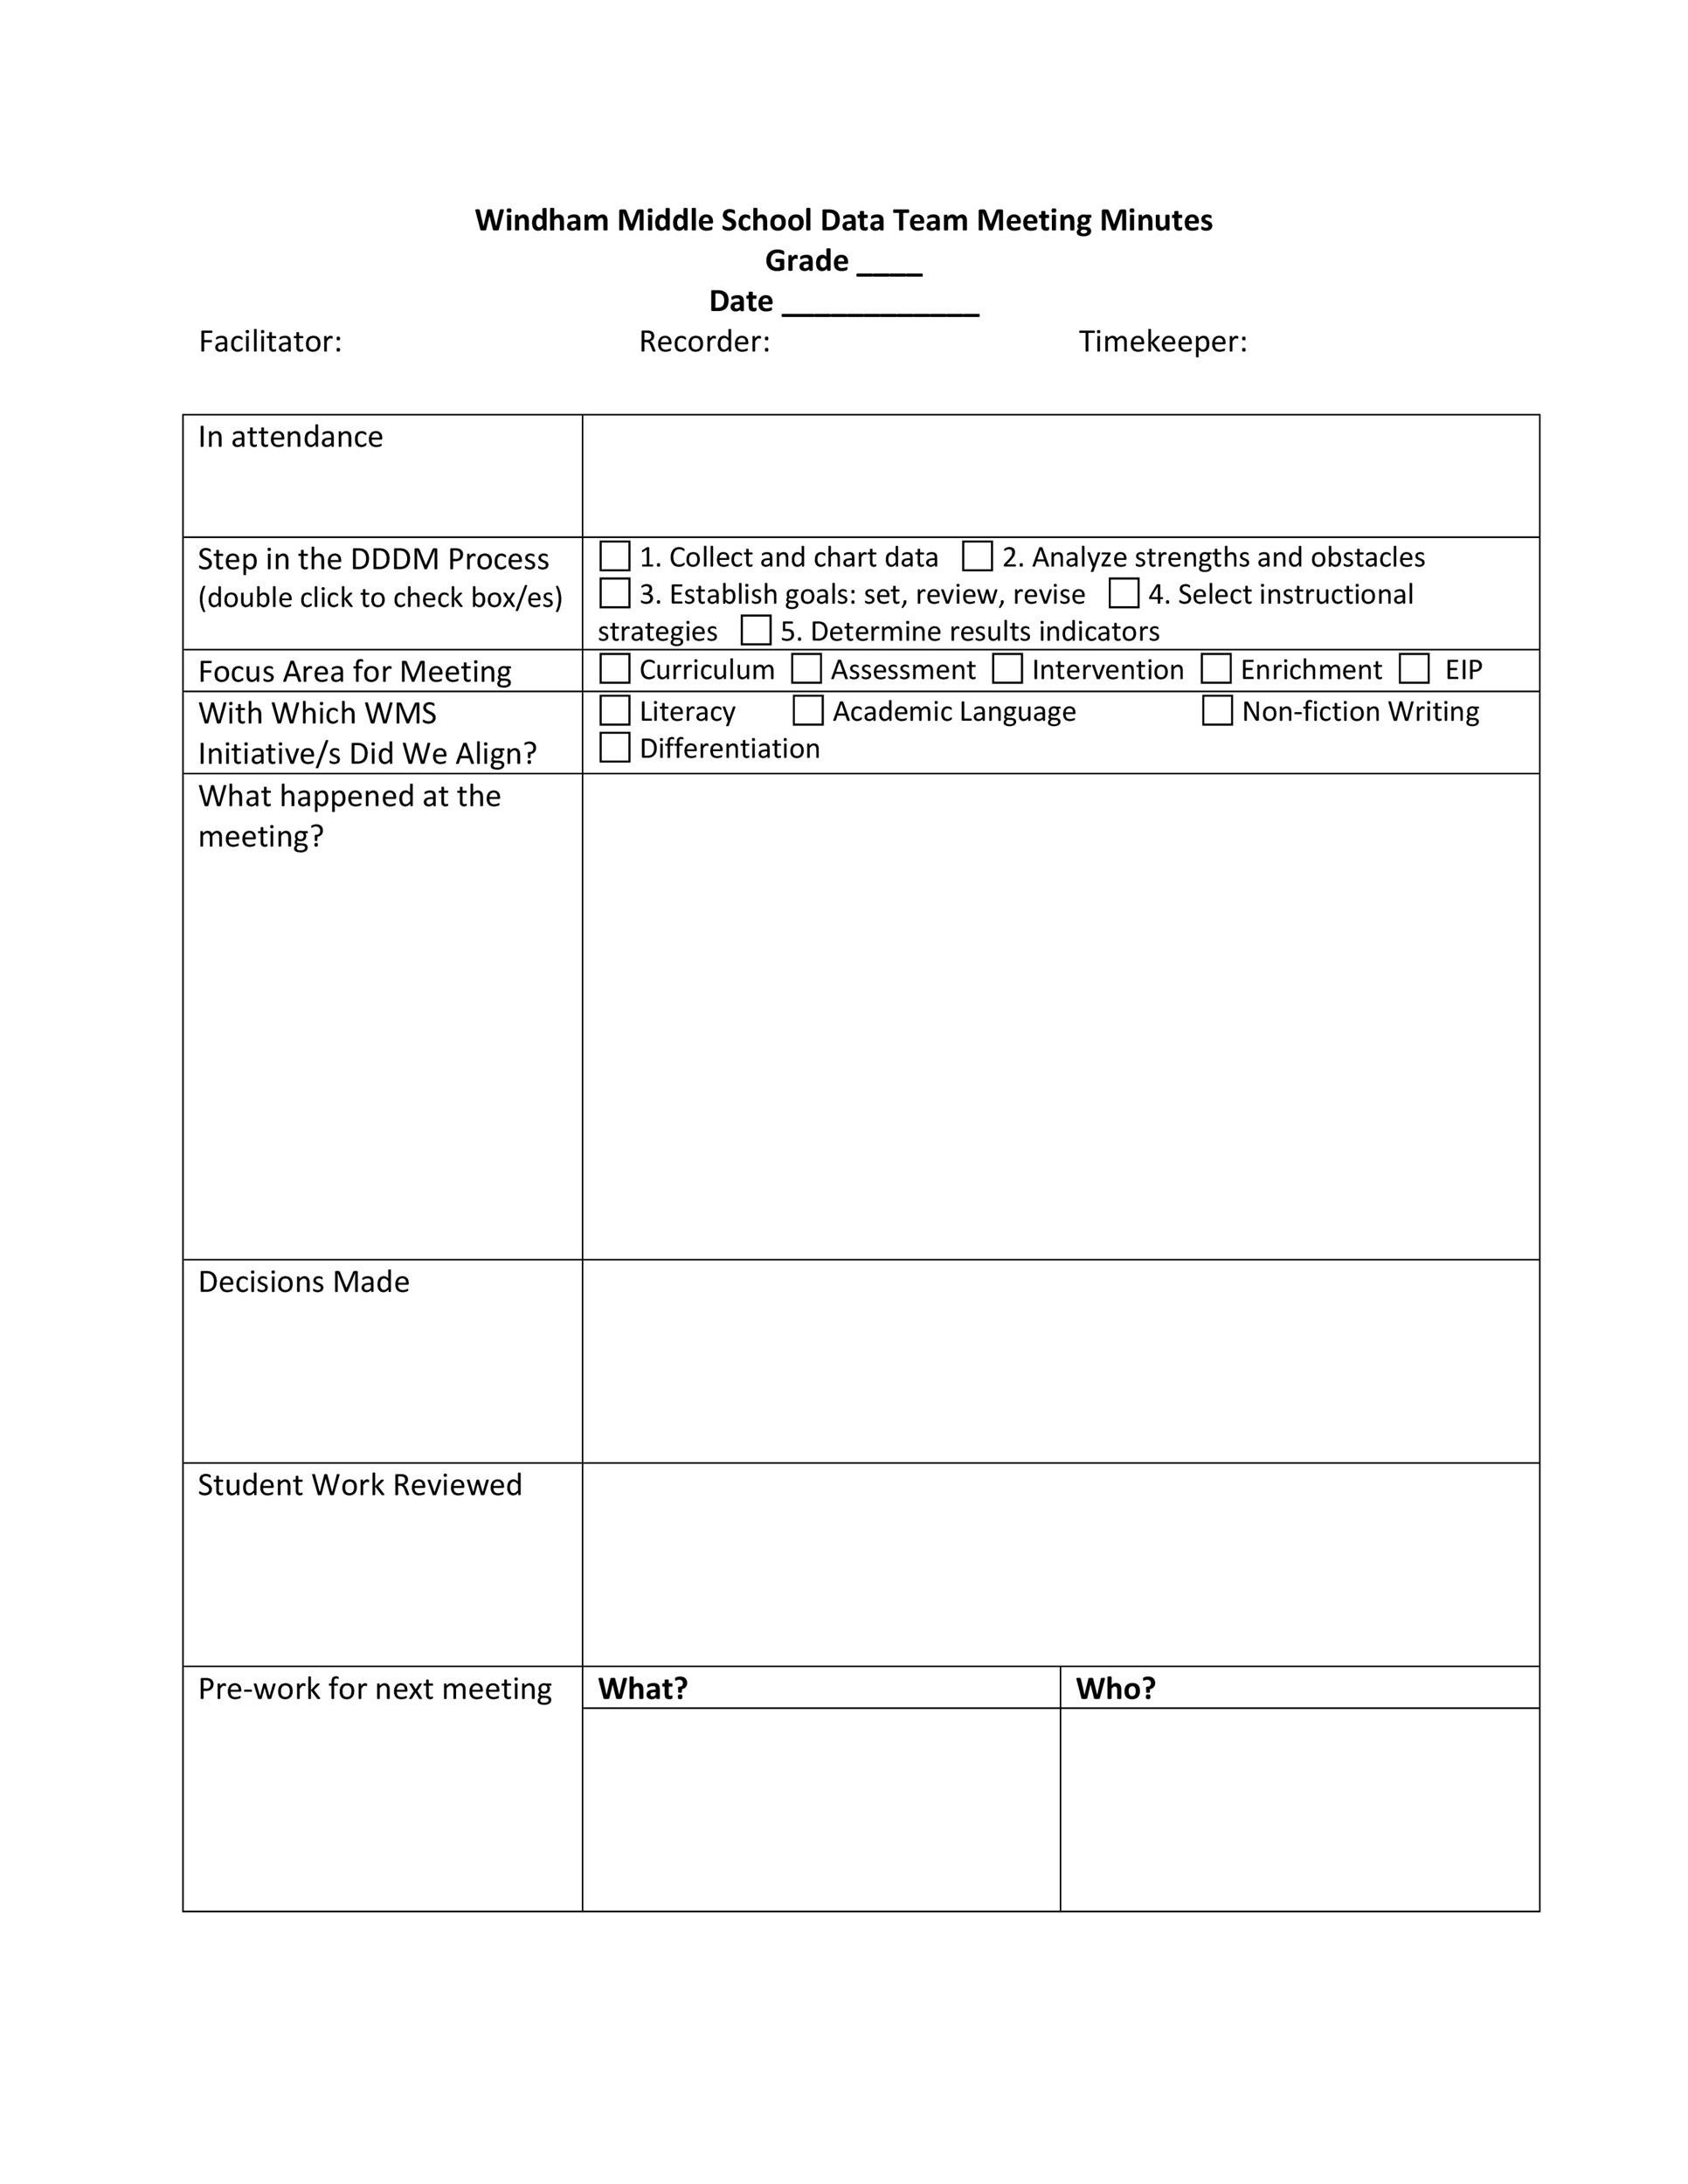 20-handy-meeting-minutes-meeting-notes-templates